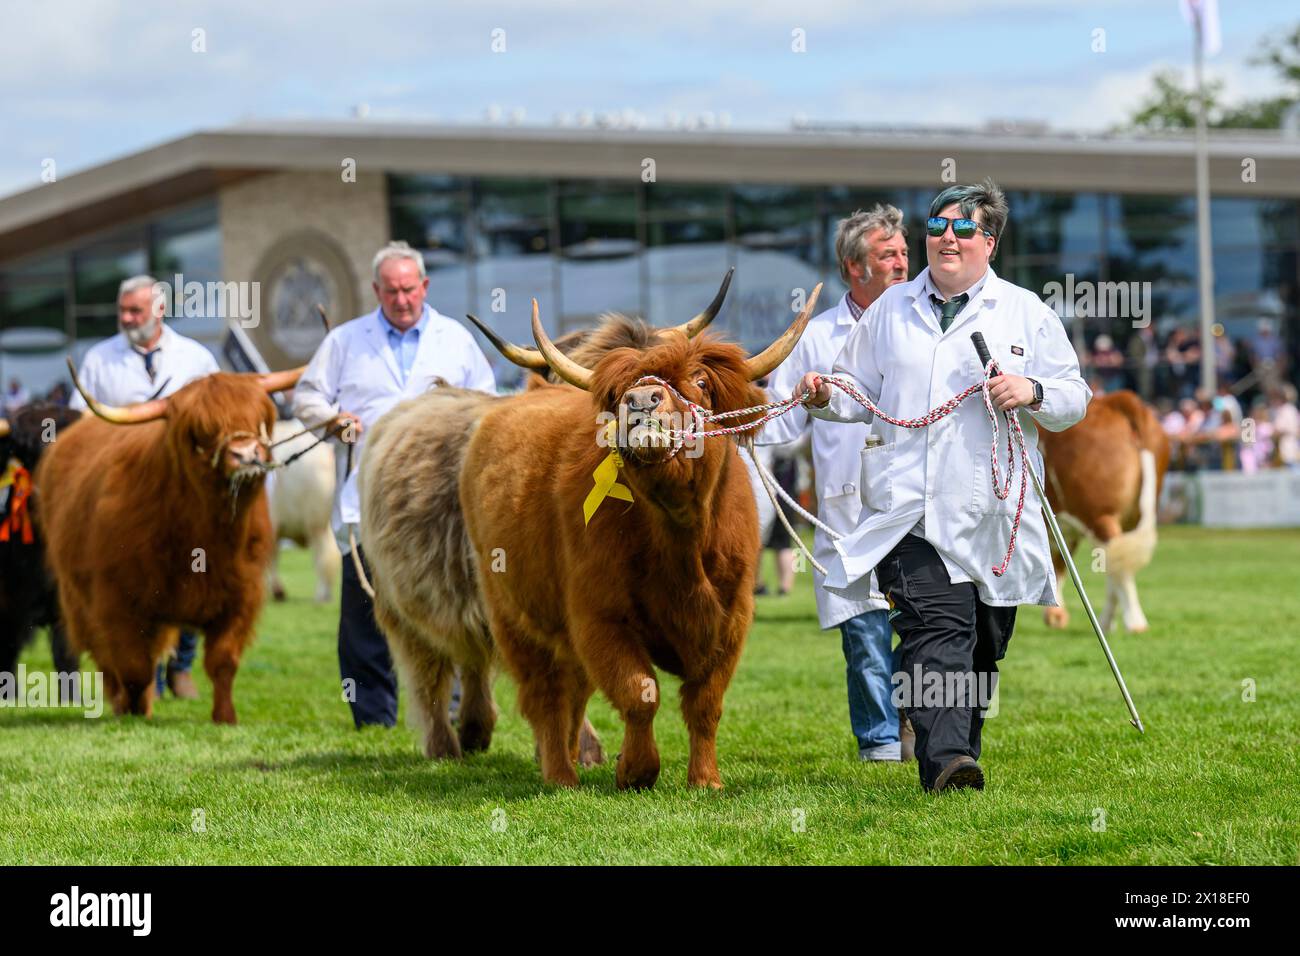 The Royal Highland Show Cattle Highland Cow Stock Photo